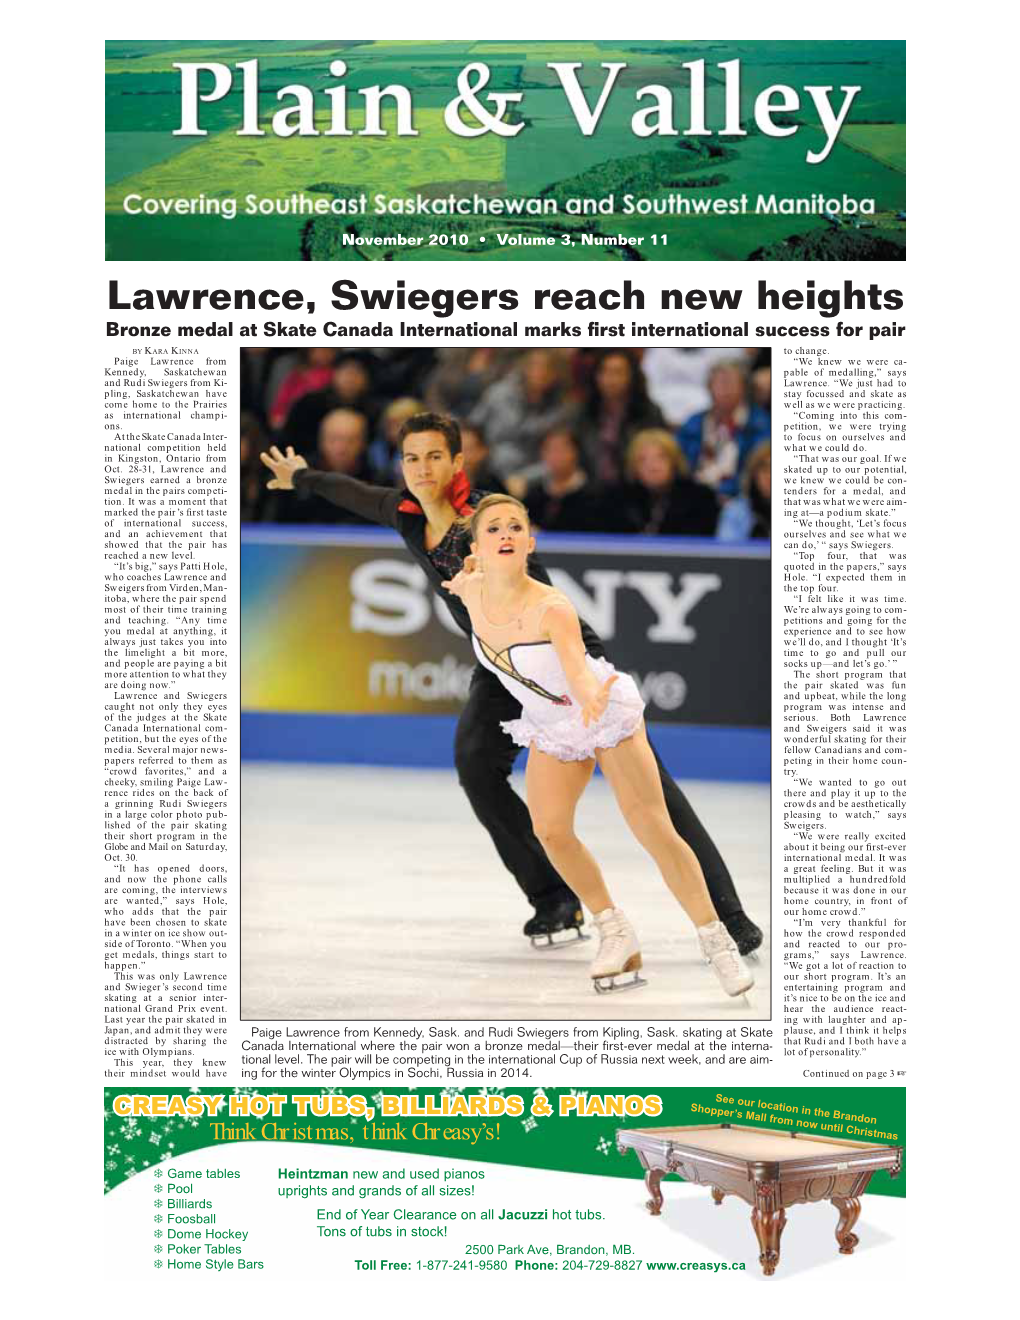 Lawrence, Swiegers Reach New Heights